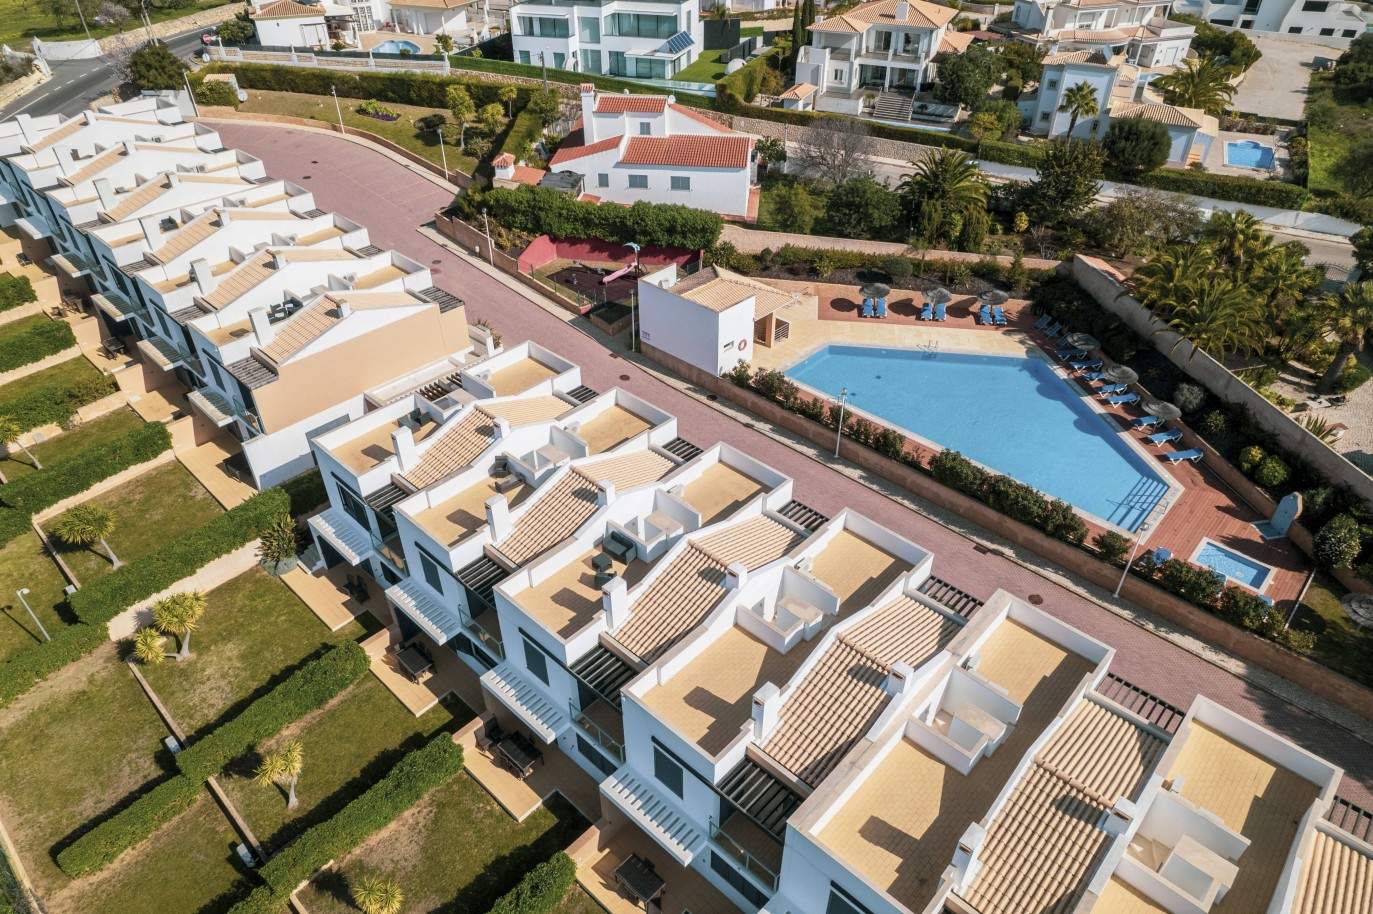 3 bedroom townhouses with sea view, for sale in Albufeira, Algarve_199235